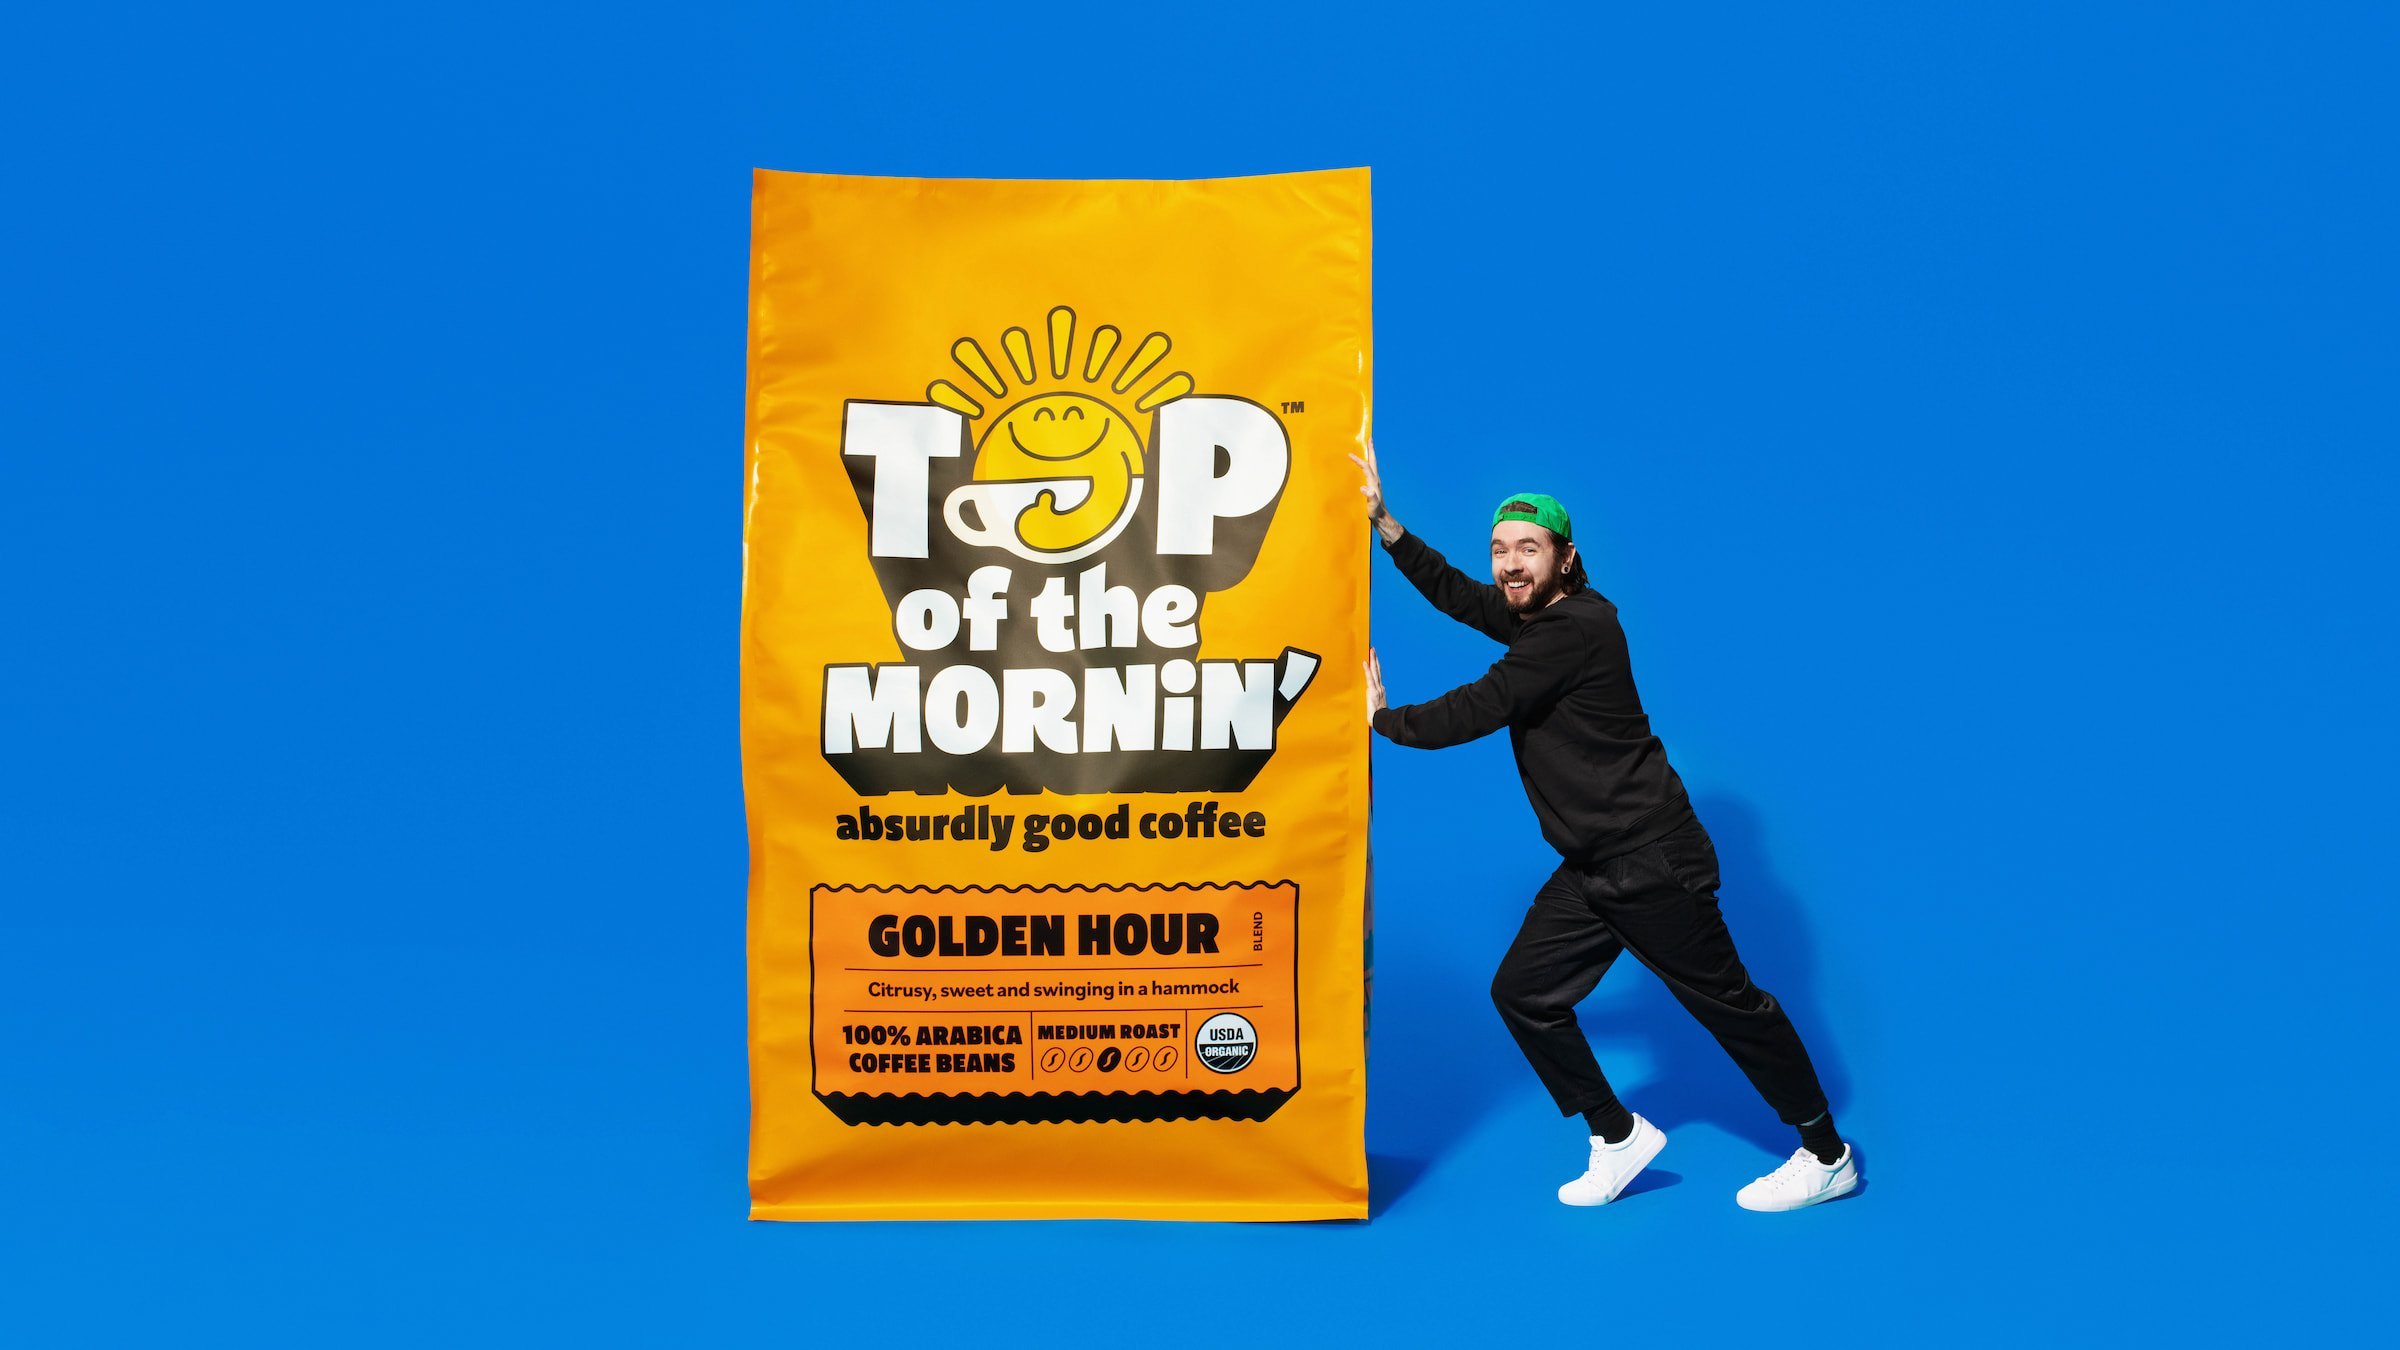 Packaging design and art direction for Top of the Mornin’ Coffee by London-based Earthling Studio.